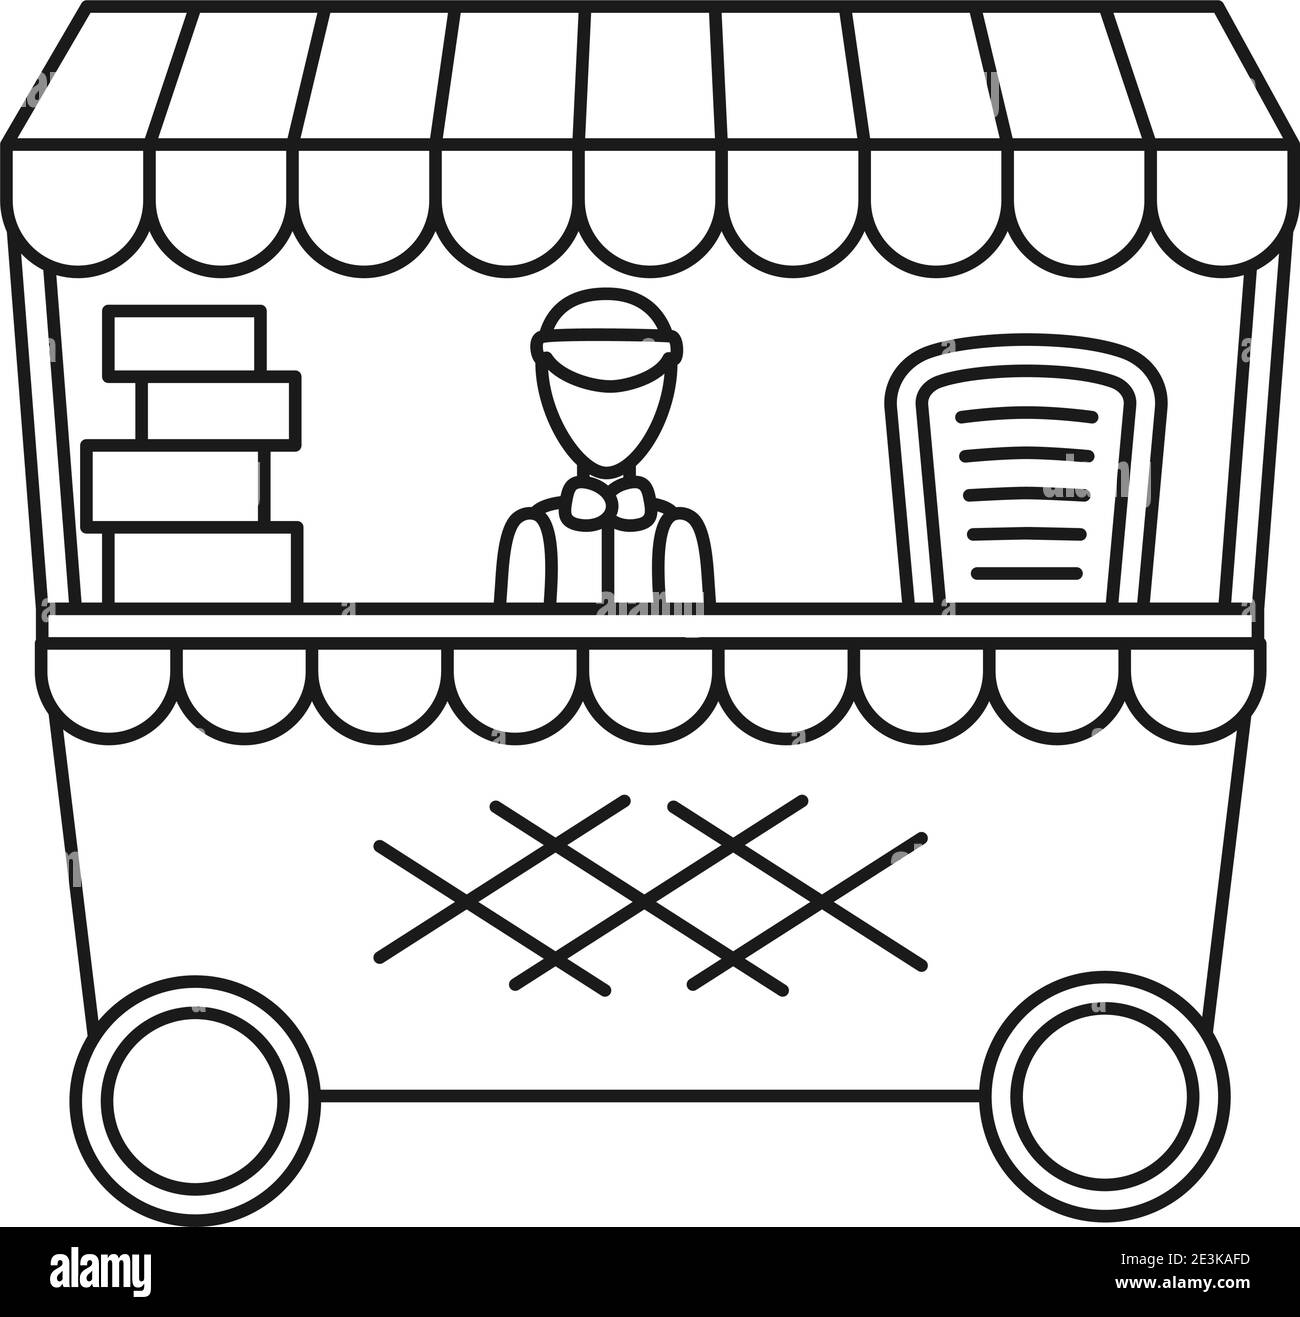 Line art black and white food cart. Gift stall with boxes and one employee. Vector illustration for poster, site, gift card or coloring book decoratio Stock Vector